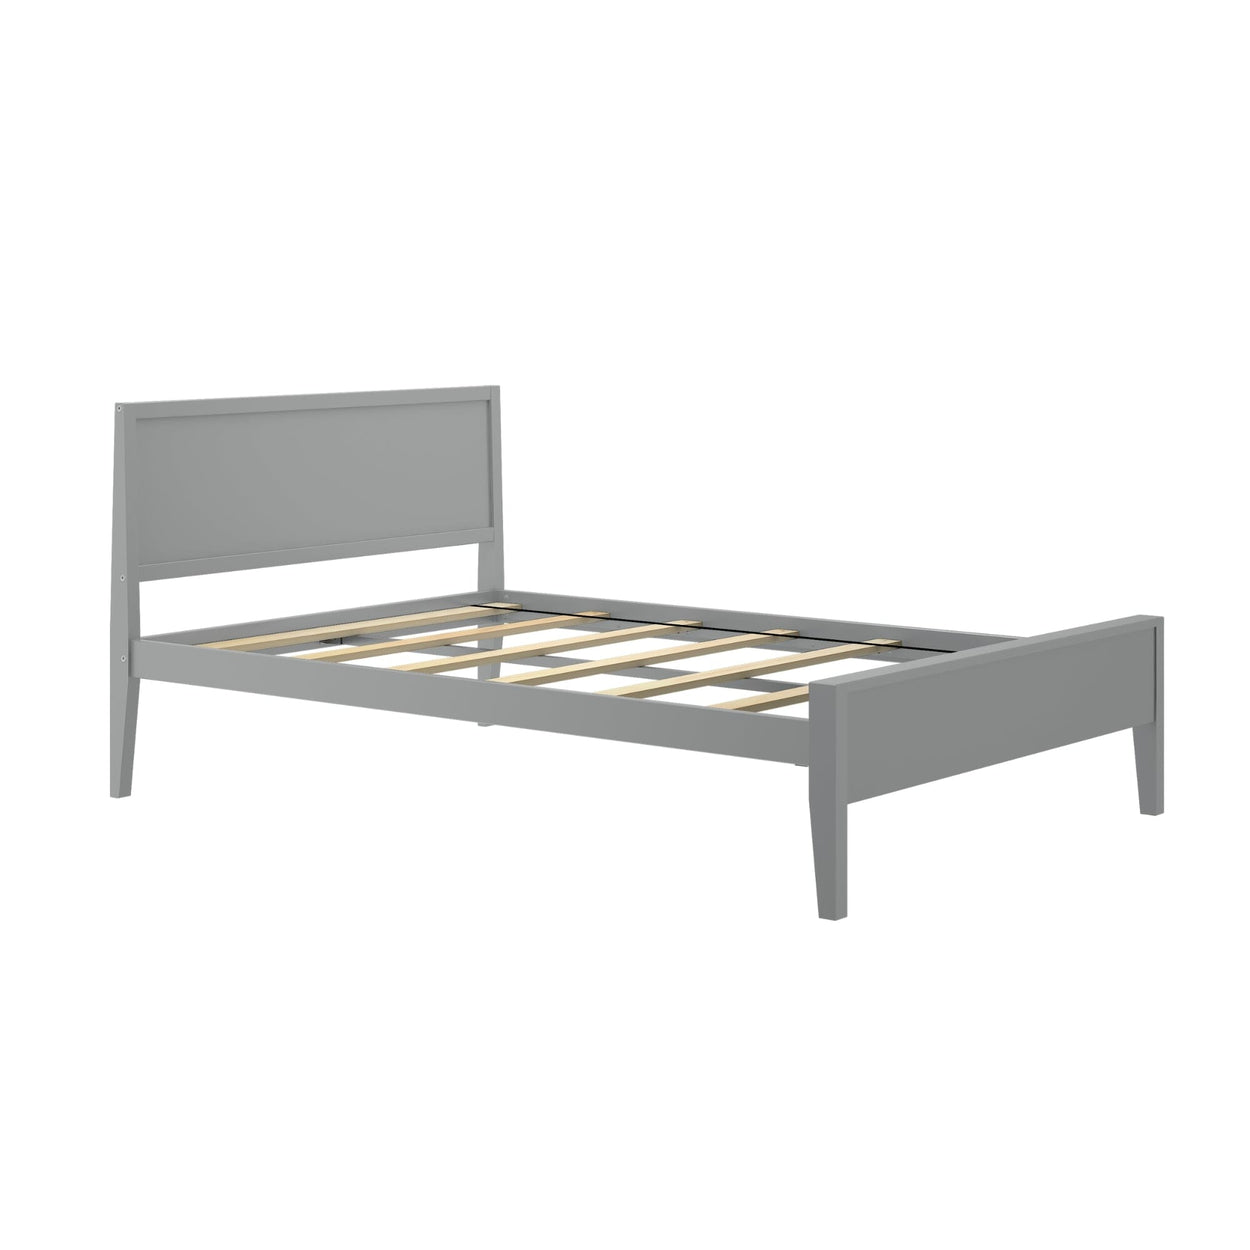 181101-121 : Kids Beds Classic Full-Size Bed with Panel Headboard, Grey